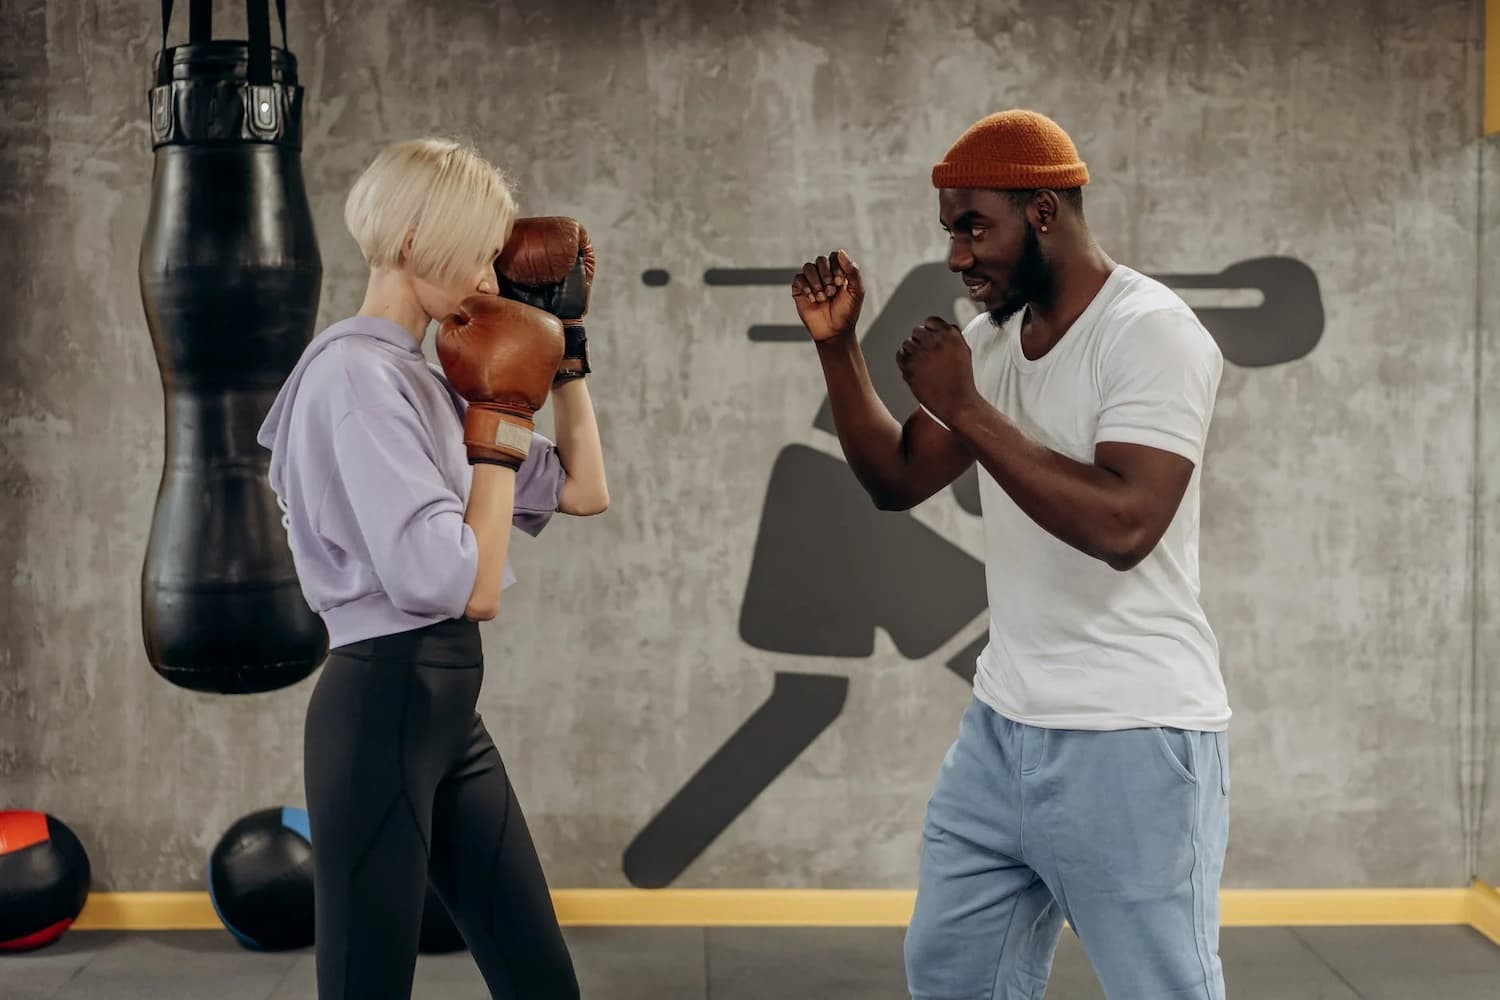 Boxing as Exercise: The Pros & Cons, and Everything in Between